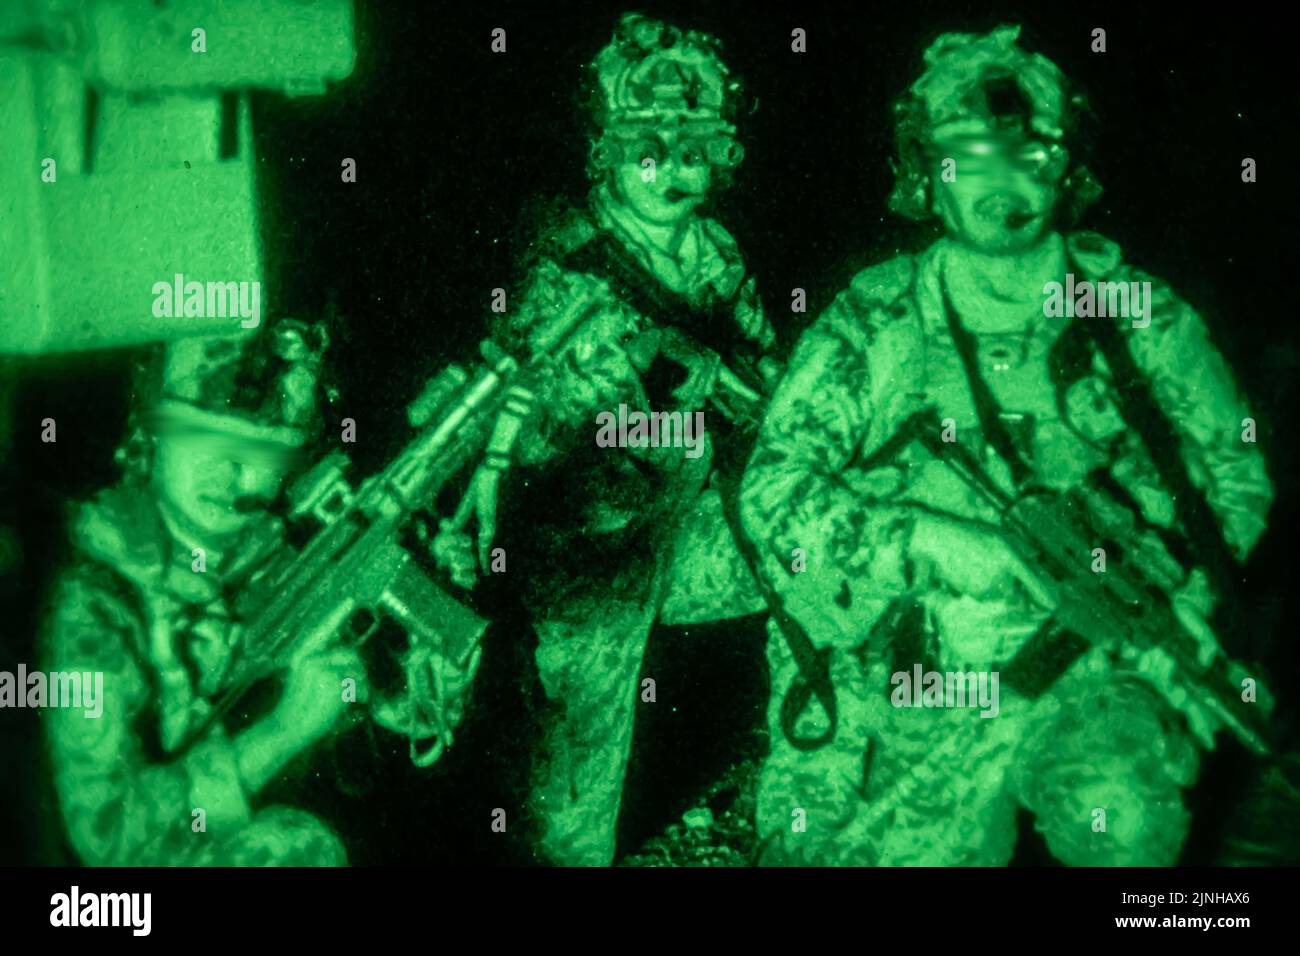 FORT IRWIN, Calif. – Republic of Korea Special Warfare Command (RoK SWC) service members assault an objective under the cover of night with Green Berets from 3rd Battalion, 1st Special Forces Group (Airborne) during an exercise at the National Training Center, Fort Irwin, Calif. on June 29, 2022. This combined training affords opportunities for Soldiers with RoK SWC and 1st SFG (A) to exchange training tactics and techniques. These exercises continue to strengthen Alliances on the peninsula. (U.S. Army photo by Sgt. Thoman Johnson) (This photo has been altered for security purposes.) Stock Photo